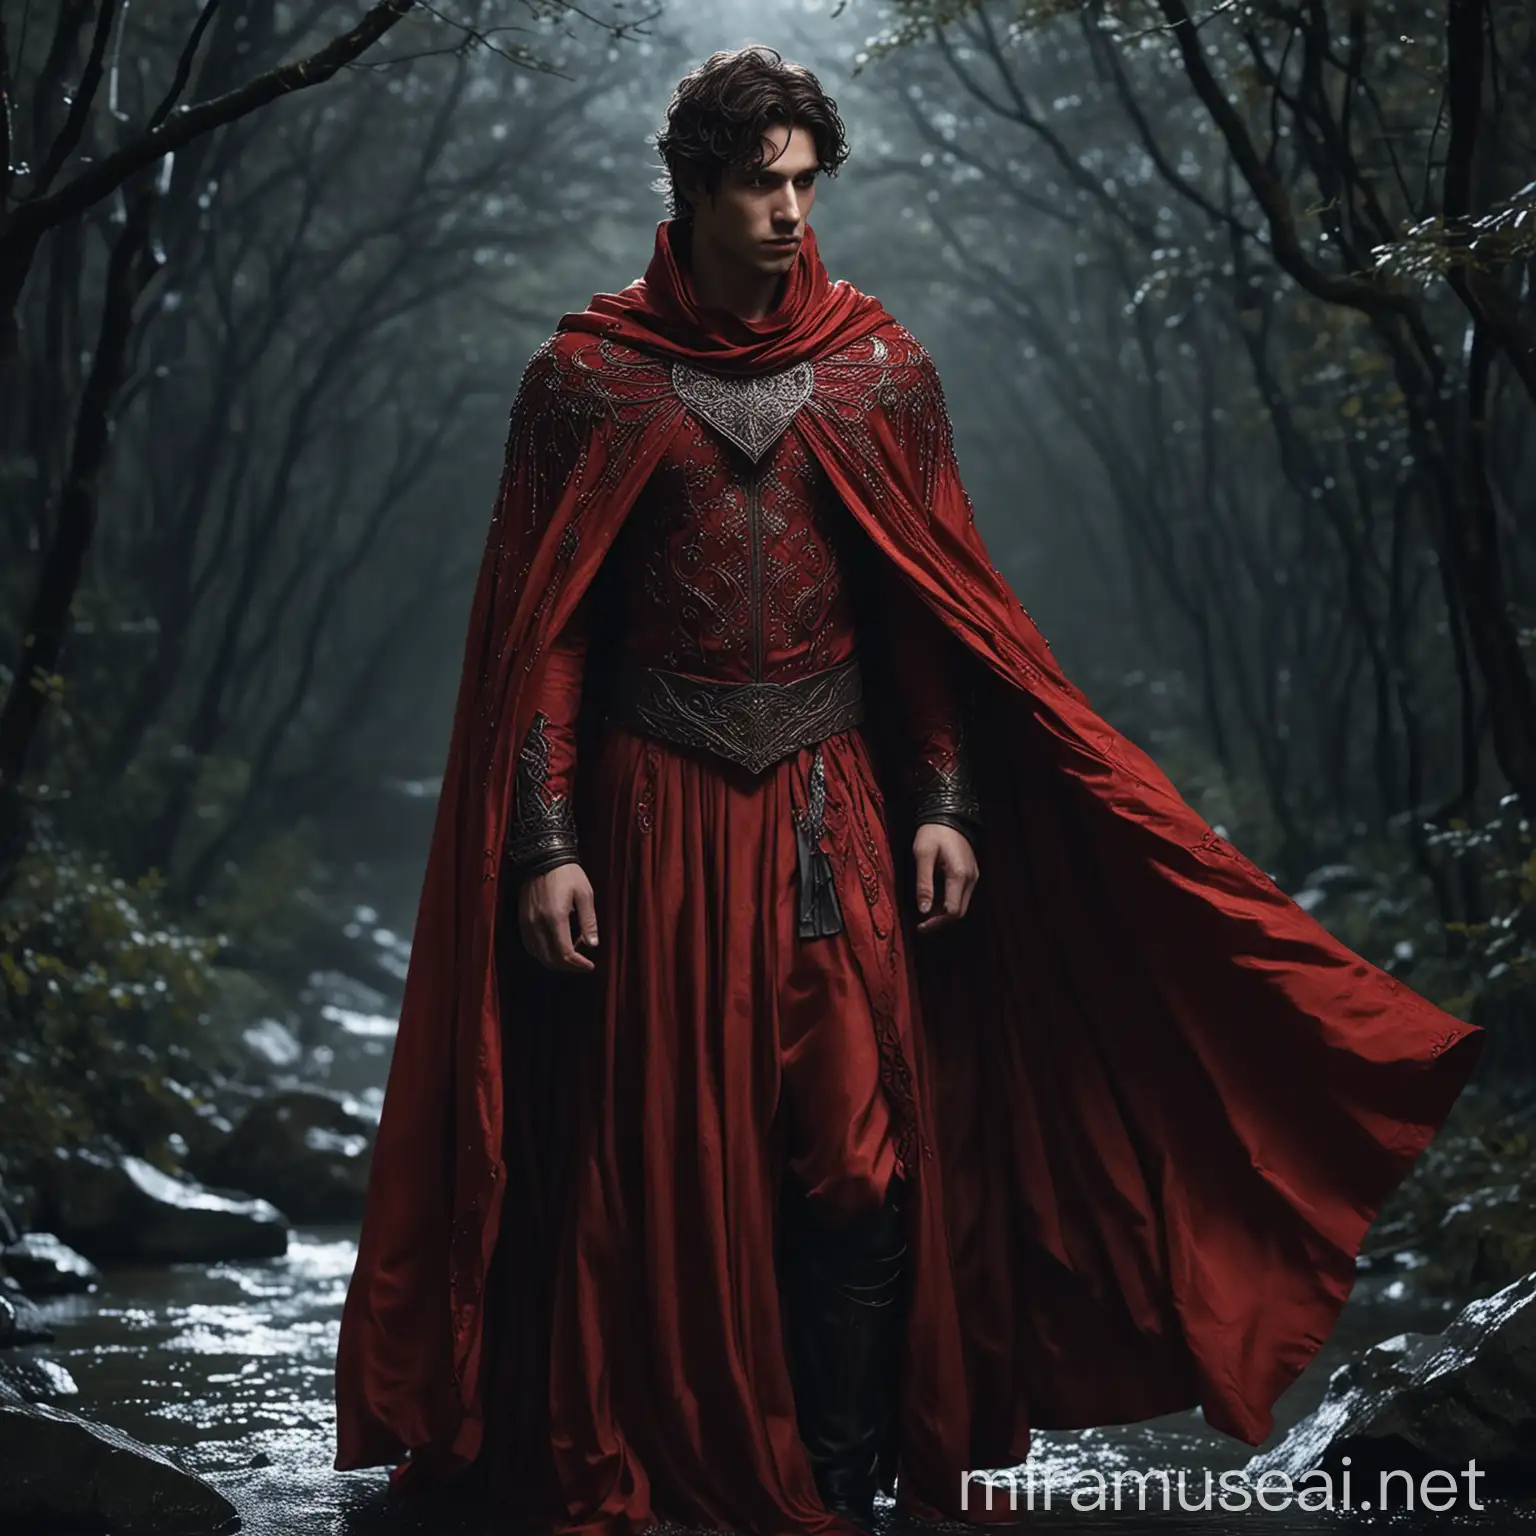 give me a prompt for this he image depicts a character dressed in an intricately designed costume that resembles a fantasy or video game character. The cape, which is the focus of the request, appears to be made of a high-quality fabric with a smooth texture and is draped over the shoulders and down the back Crafted from a fabric of ethereal beauty, the cape cascaded over  shoulders like a silken river. Its texture was as smooth as velvet, caressing his skin with a gentle touch. The deep crimson hue shimmered under the moonlight, casting an otherworldly glow upon his.